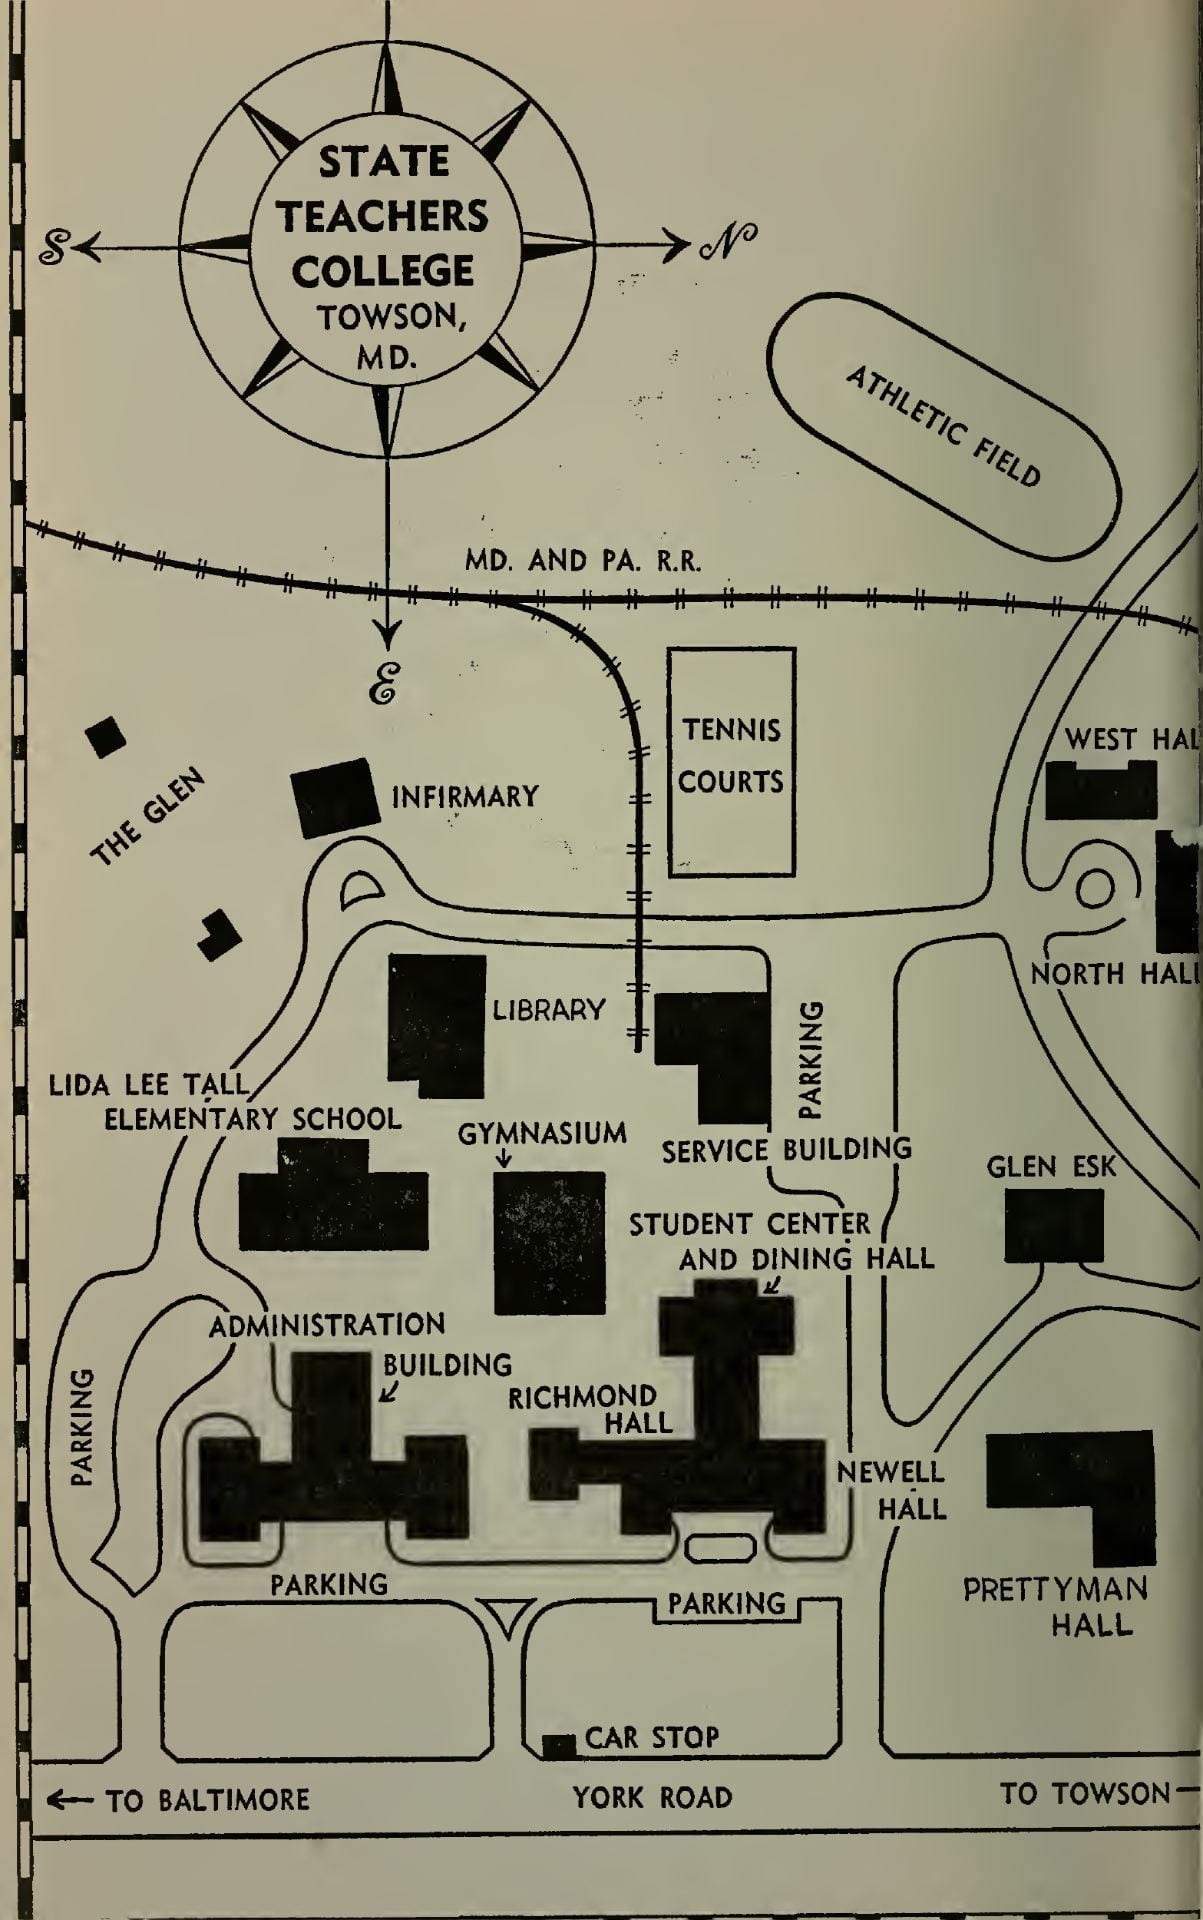 Campus map from 1957-1958. York Road is at the bottom, and the Maryland & Pennsylvania railroad is at the top, making the western border of campus. Between are the Administration Building, Richmond and Newell Halls, the elementary school, Wiedefeld gymnasium, the library and Ward and West Halls. An athletic field is on the other side of the tracks, about where CLA stands today.